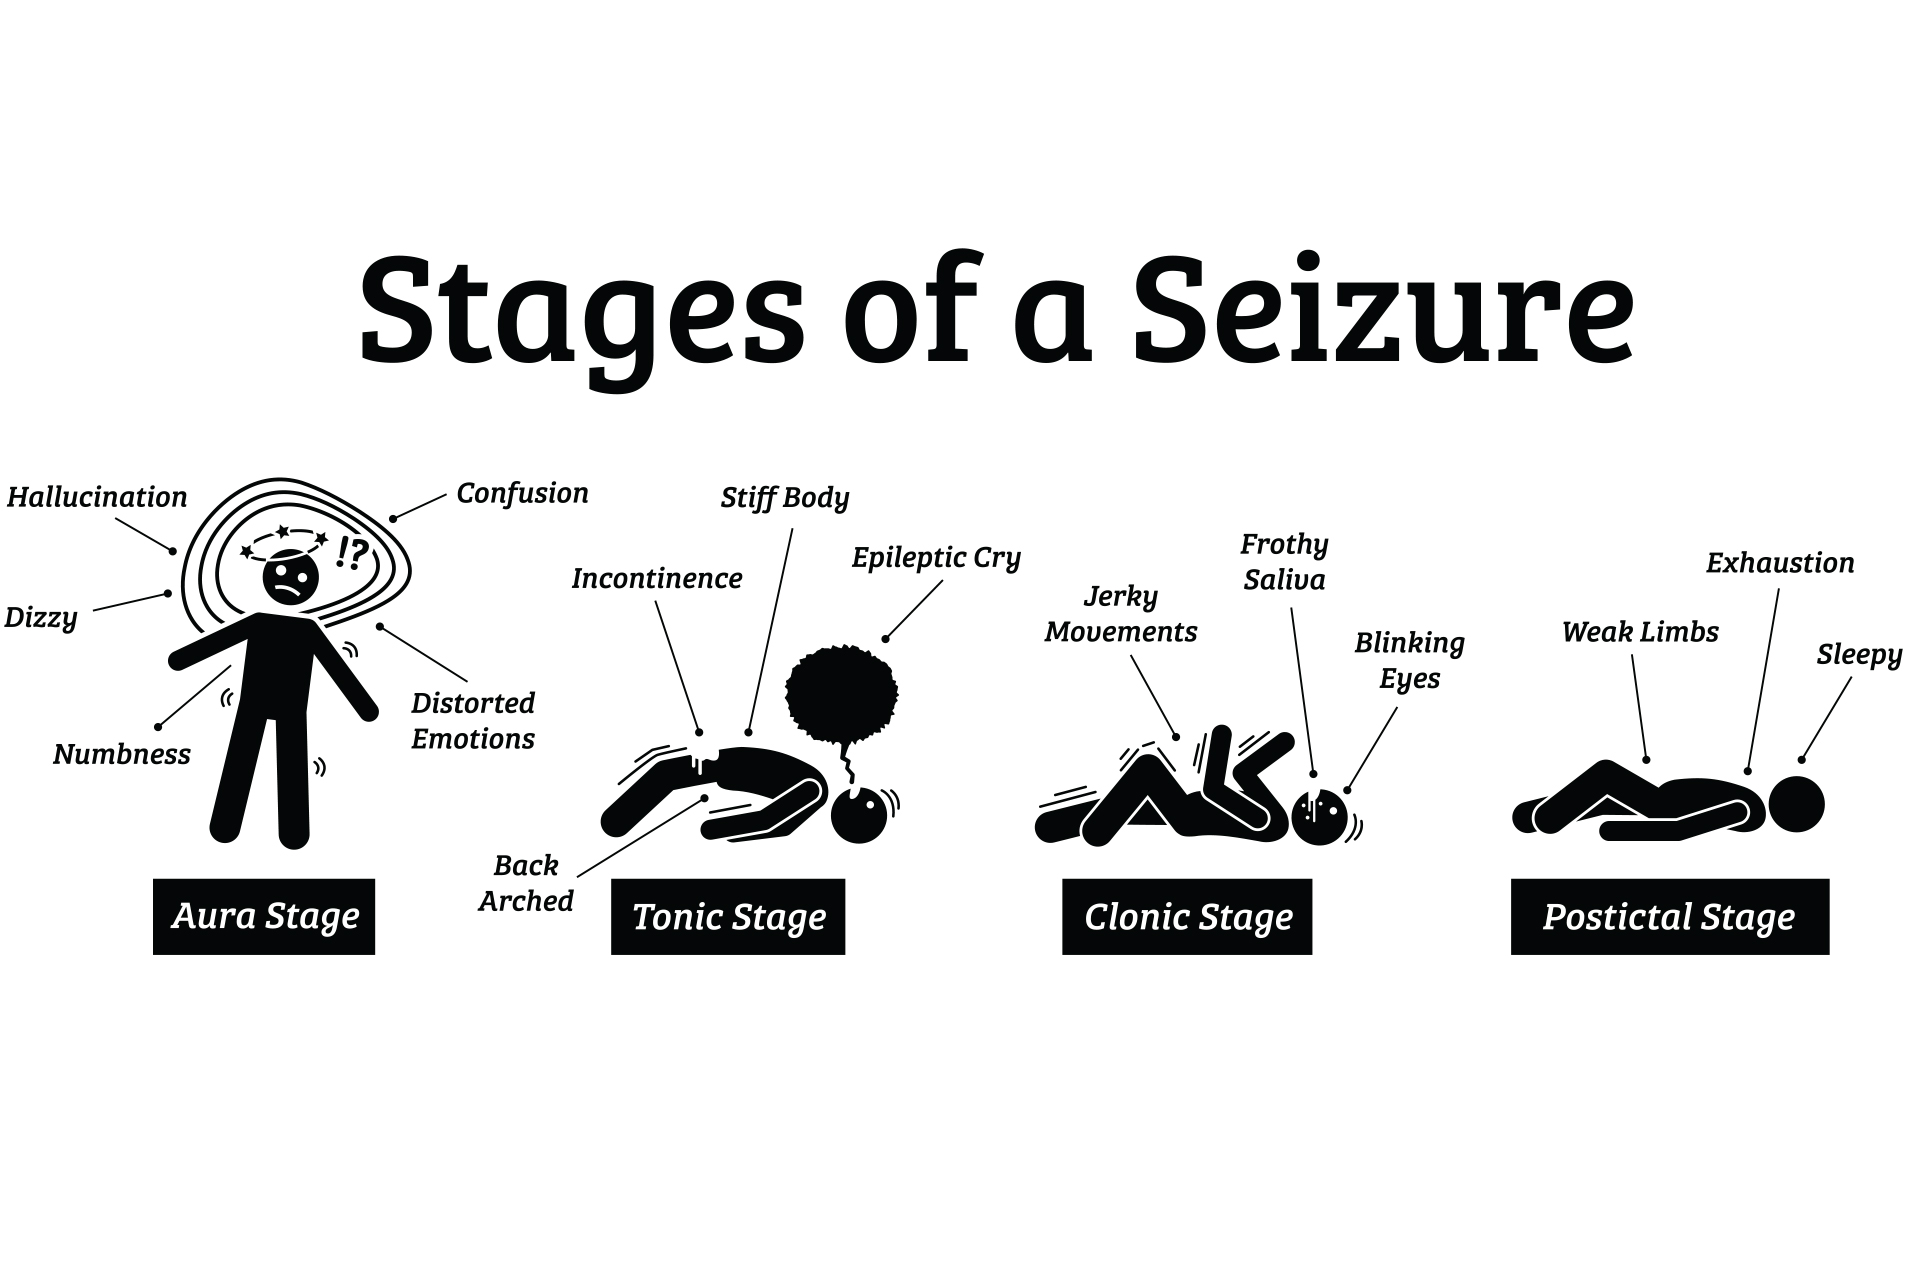 Stages of a seizure graphic